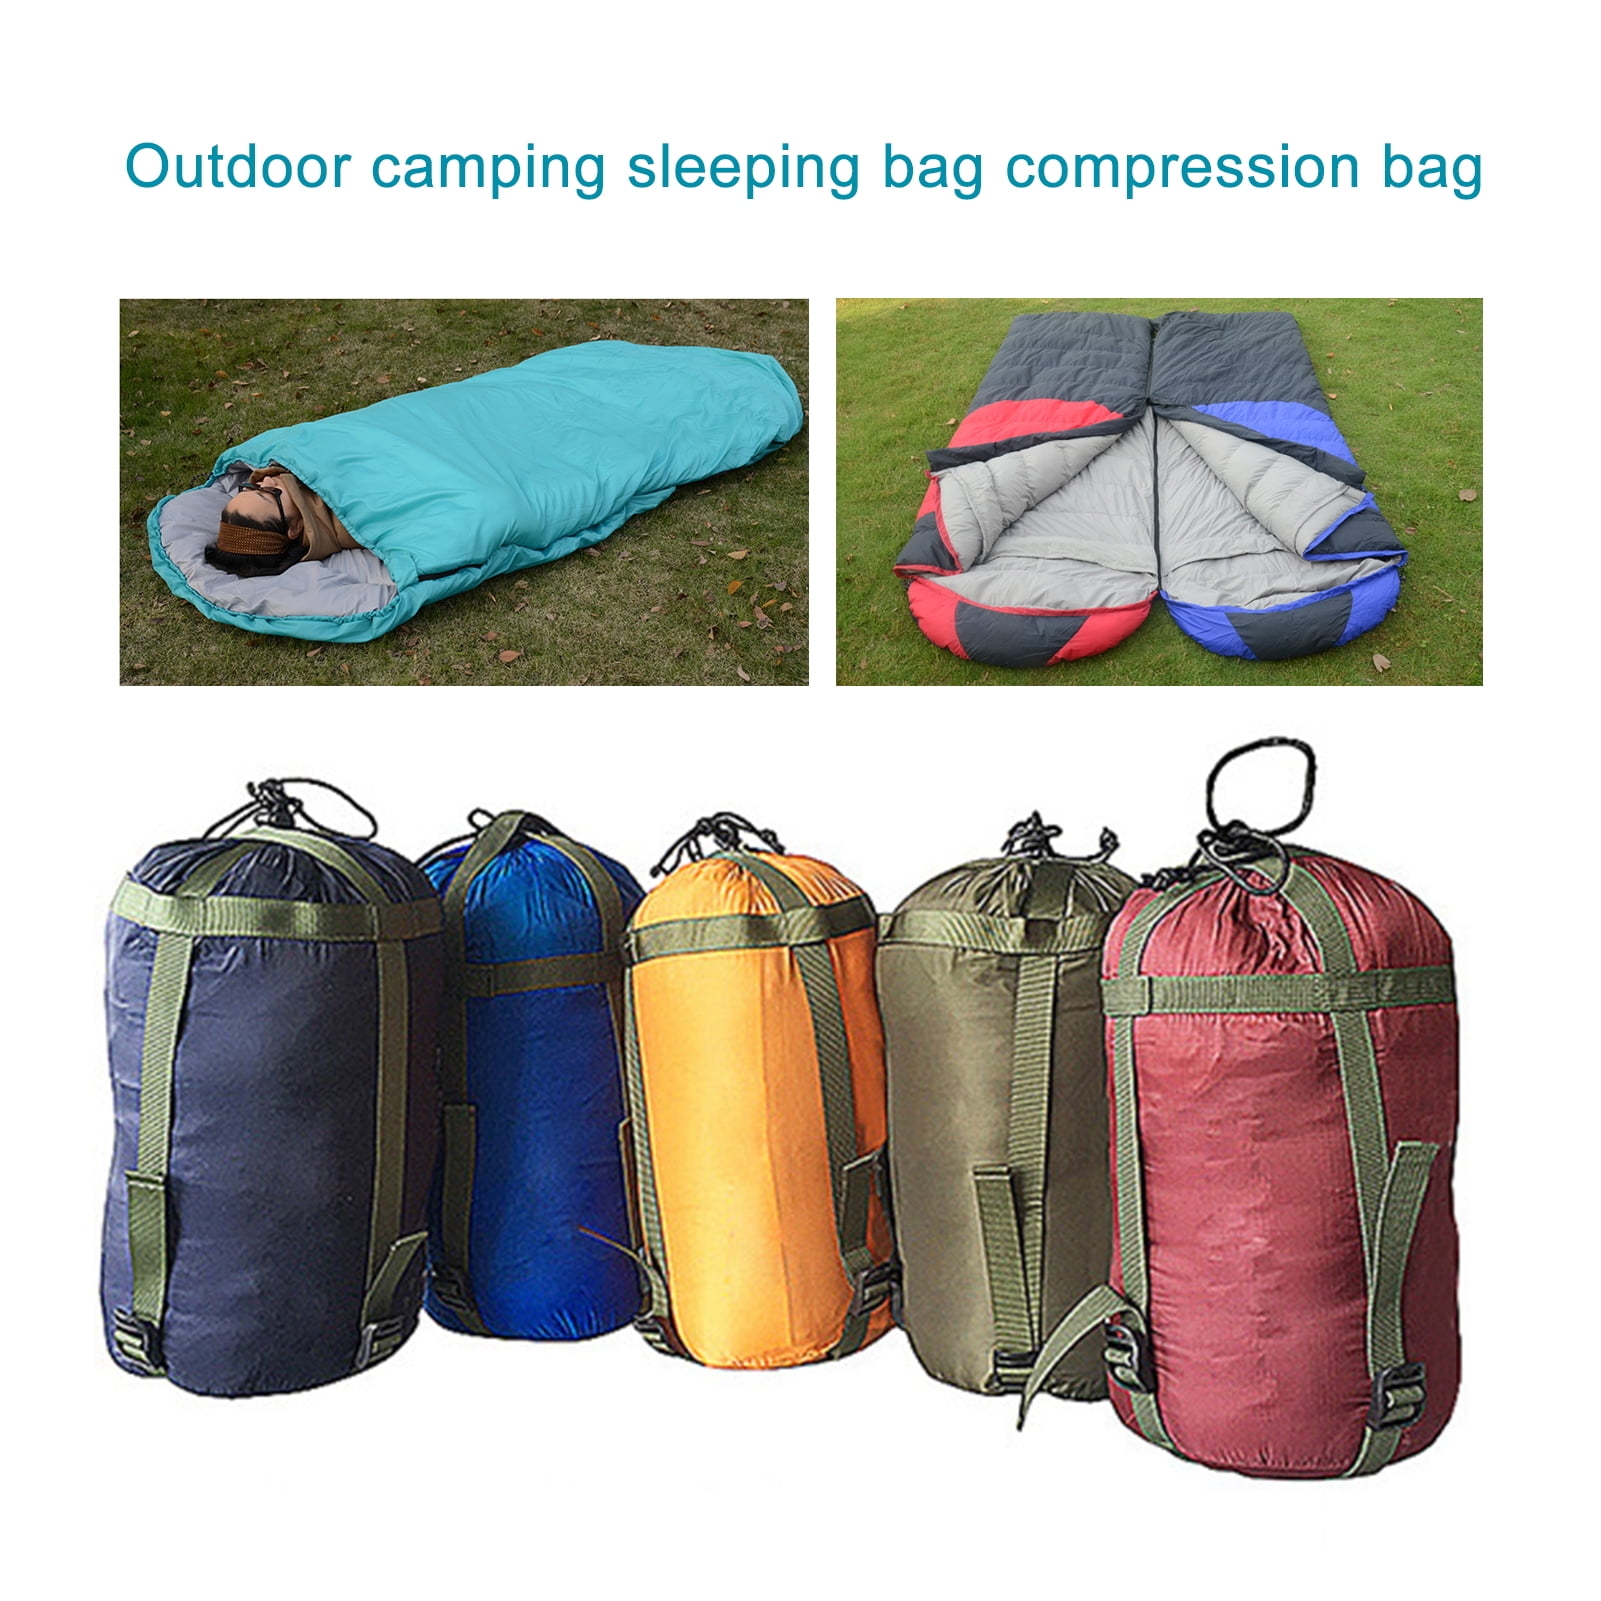 Travelwant Compression Sack, Compression Stuff Sack, Water-Resistant &  Ultralight Sleeping Bag Stuff Sack - Space Saving Gear for Camping, Hiking